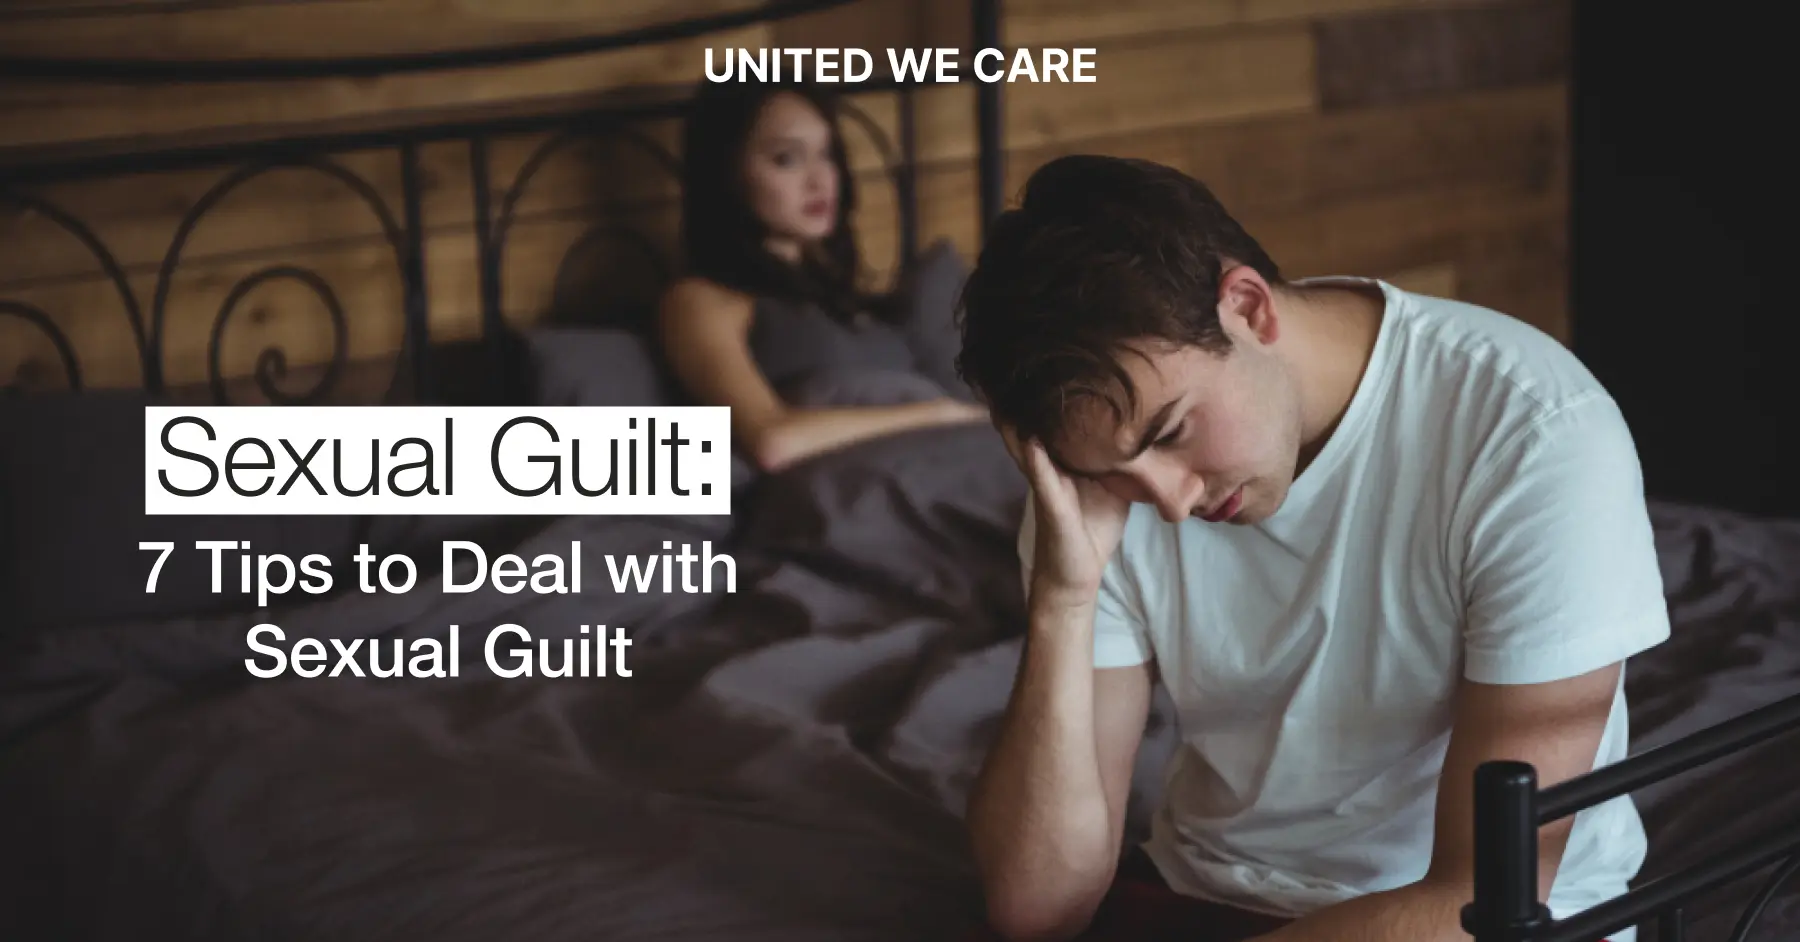 Sexual Guilt: 7 Tips to Deal with Sexual Guilt